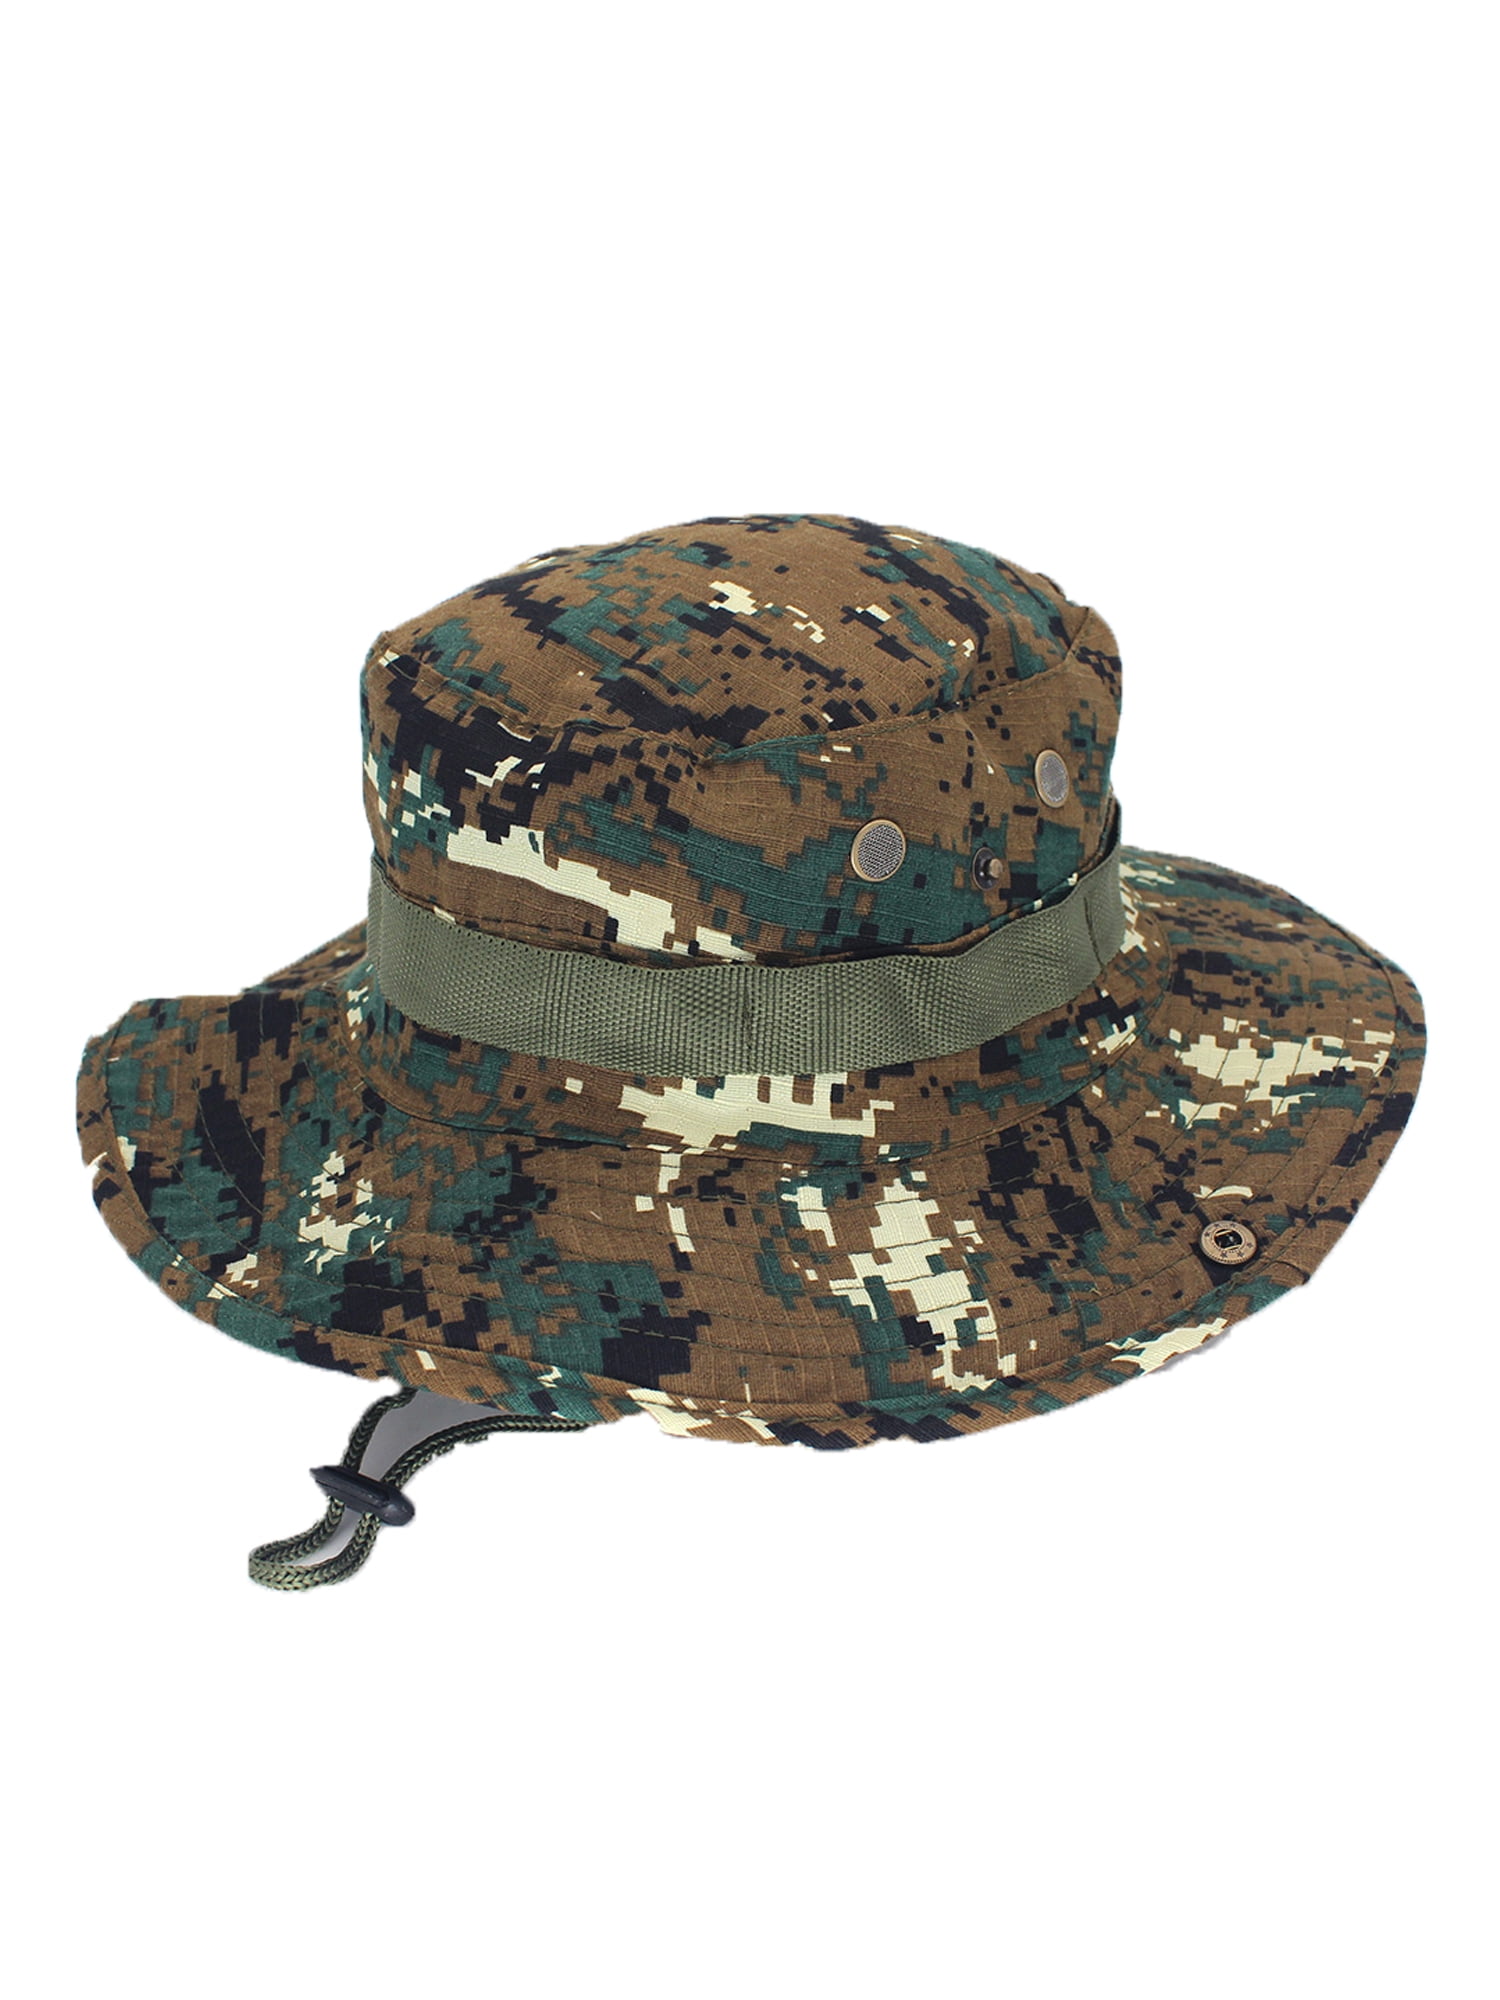 DESERT CAMOUFLAGE Military Boonie Bush Fishing Hiking Neck Flap Sun Cover Hat 